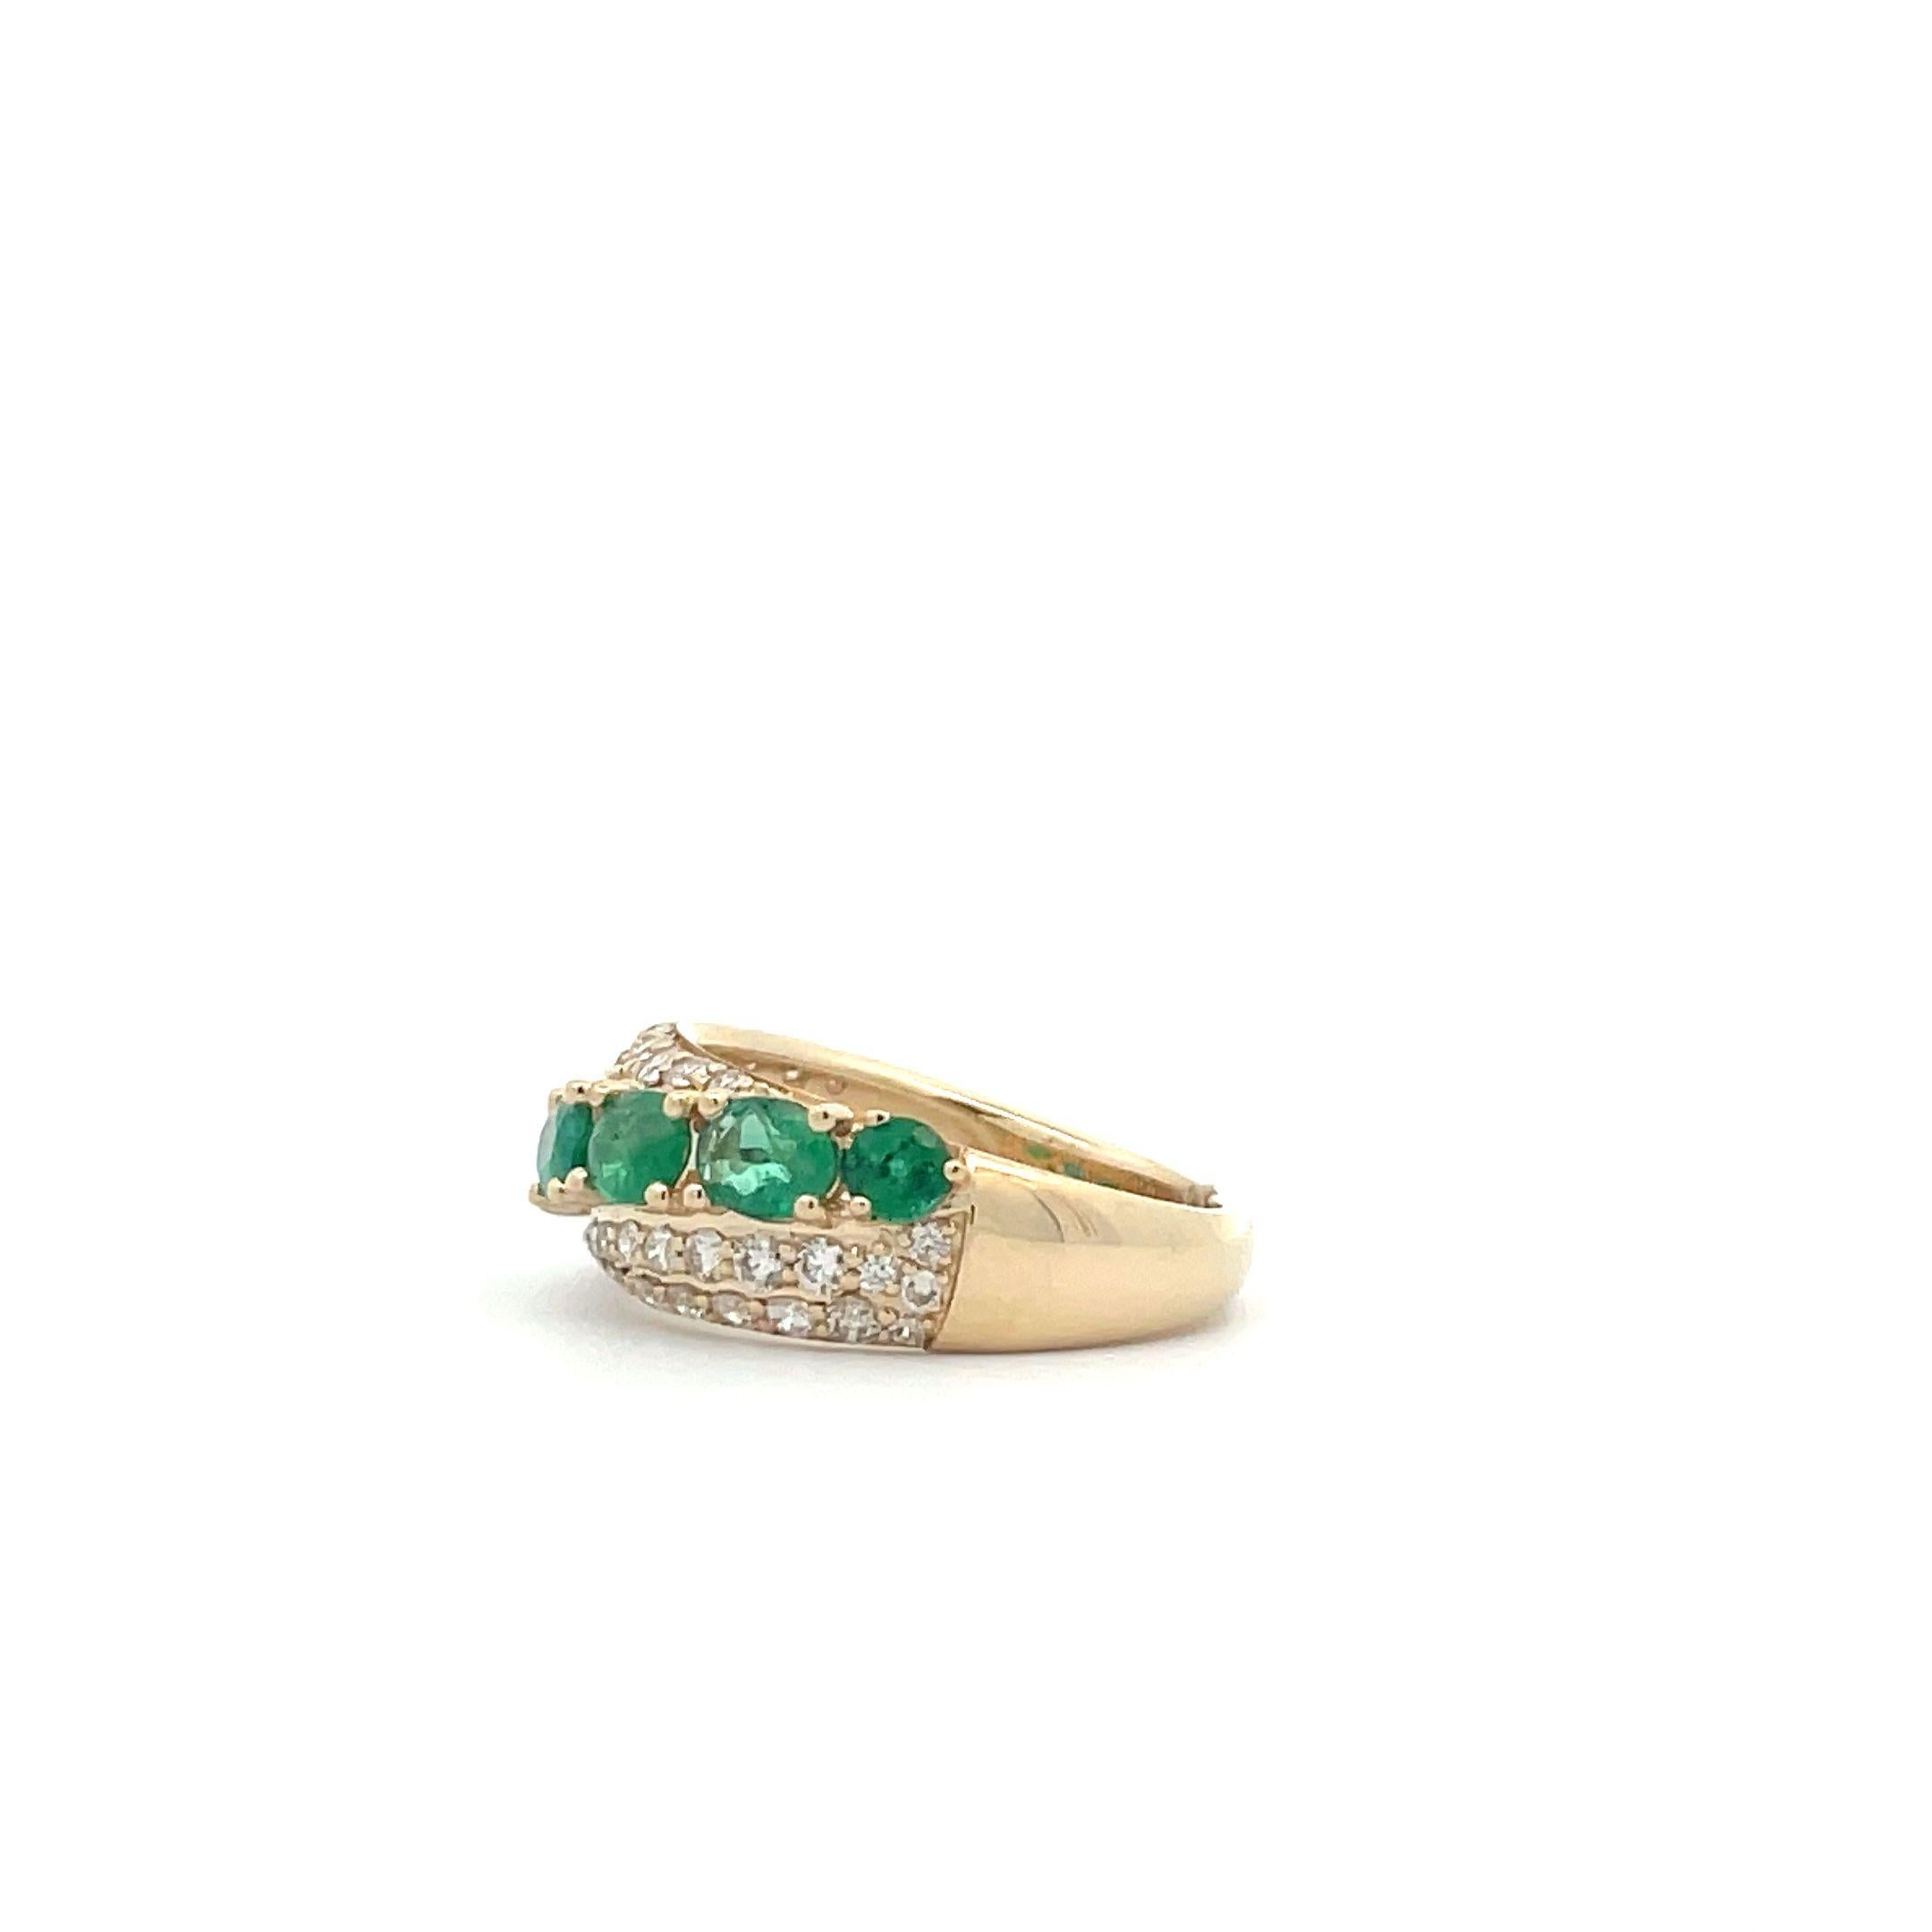 This cocktail ring celebrates the beauty of emeralds and diamonds. Five oval-cut emeralds, with a total carat weight of 1.61 CT, are clustered together with diamonds. Each gem has been handpicked by professional jewelers to ensure that there are no